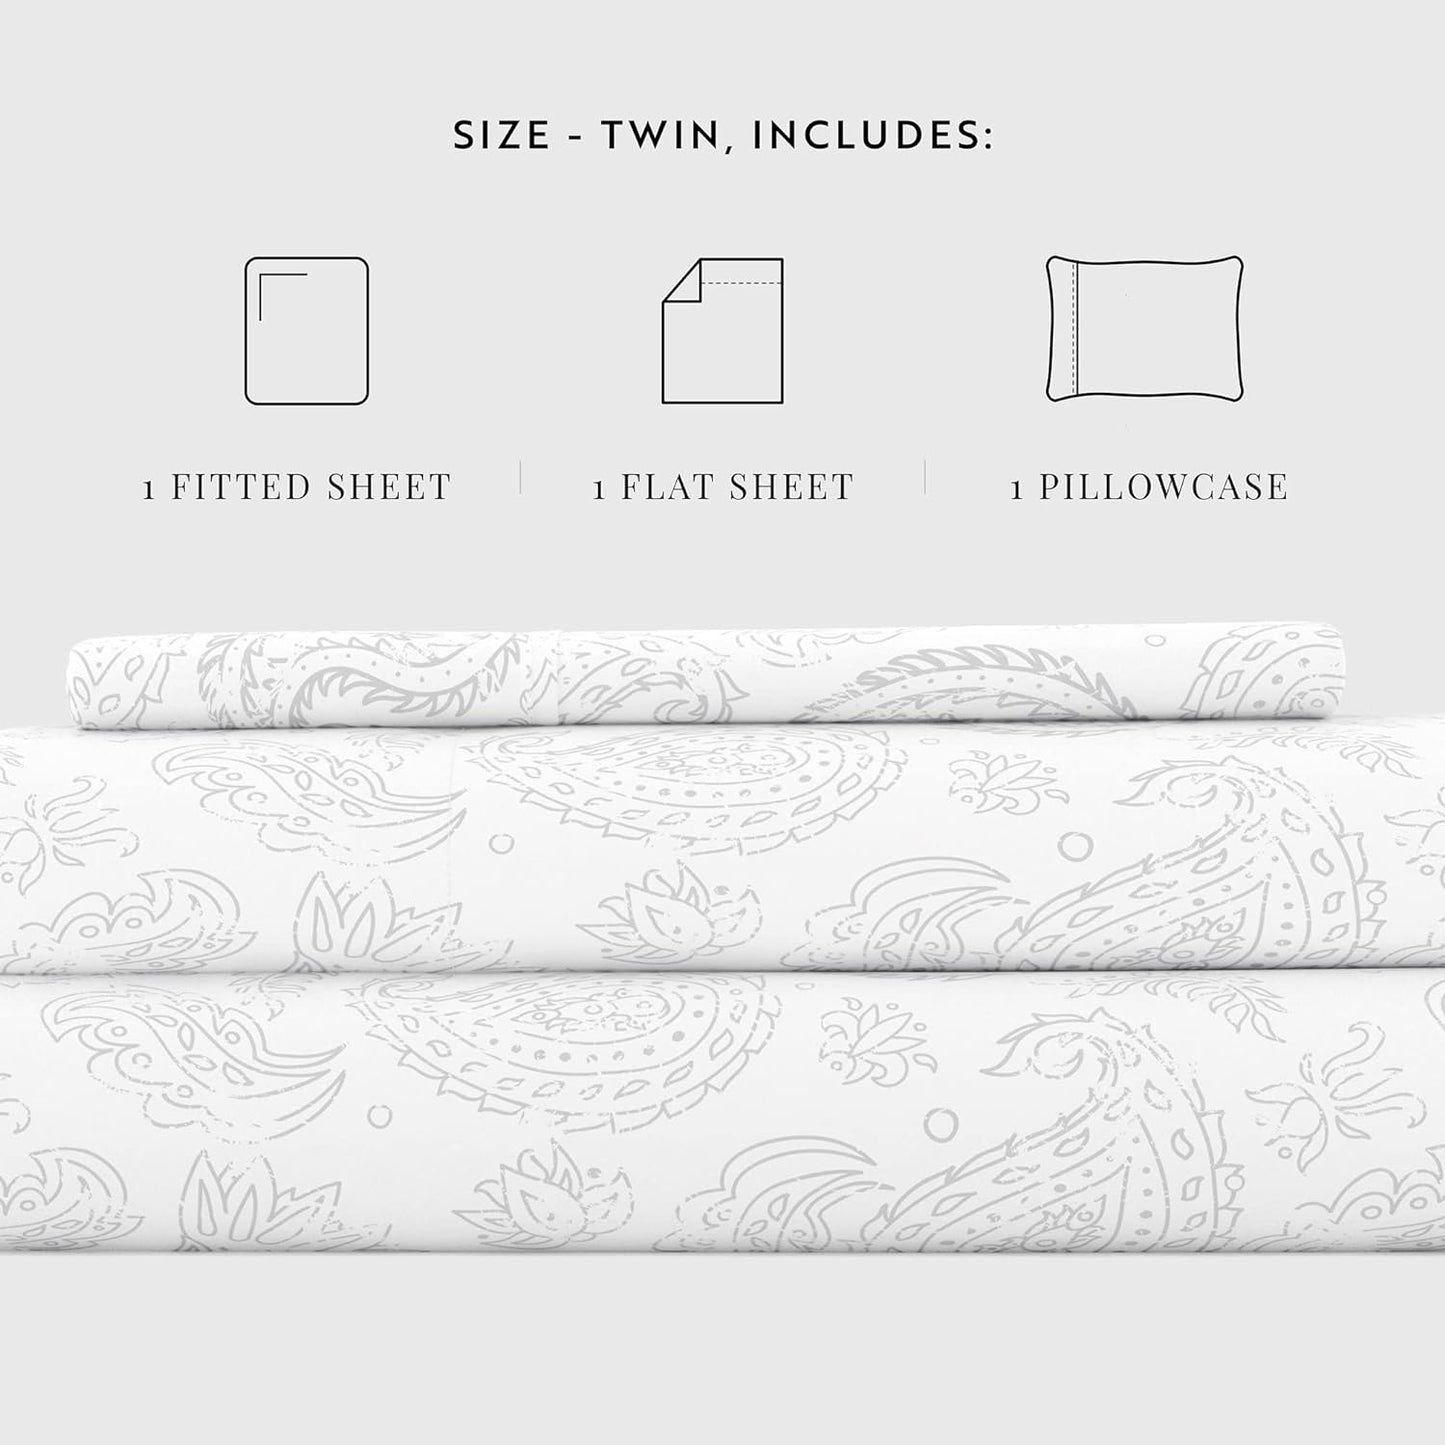 Linen Market 3 Piece Twin Bedding Sheet Set (Gray Floral) - Sleep Better Than Ever with These Ultra-Soft & Cooling Bed Sheets for Your Twin Size Bed - Deep Pocket Fits 16" Mattress